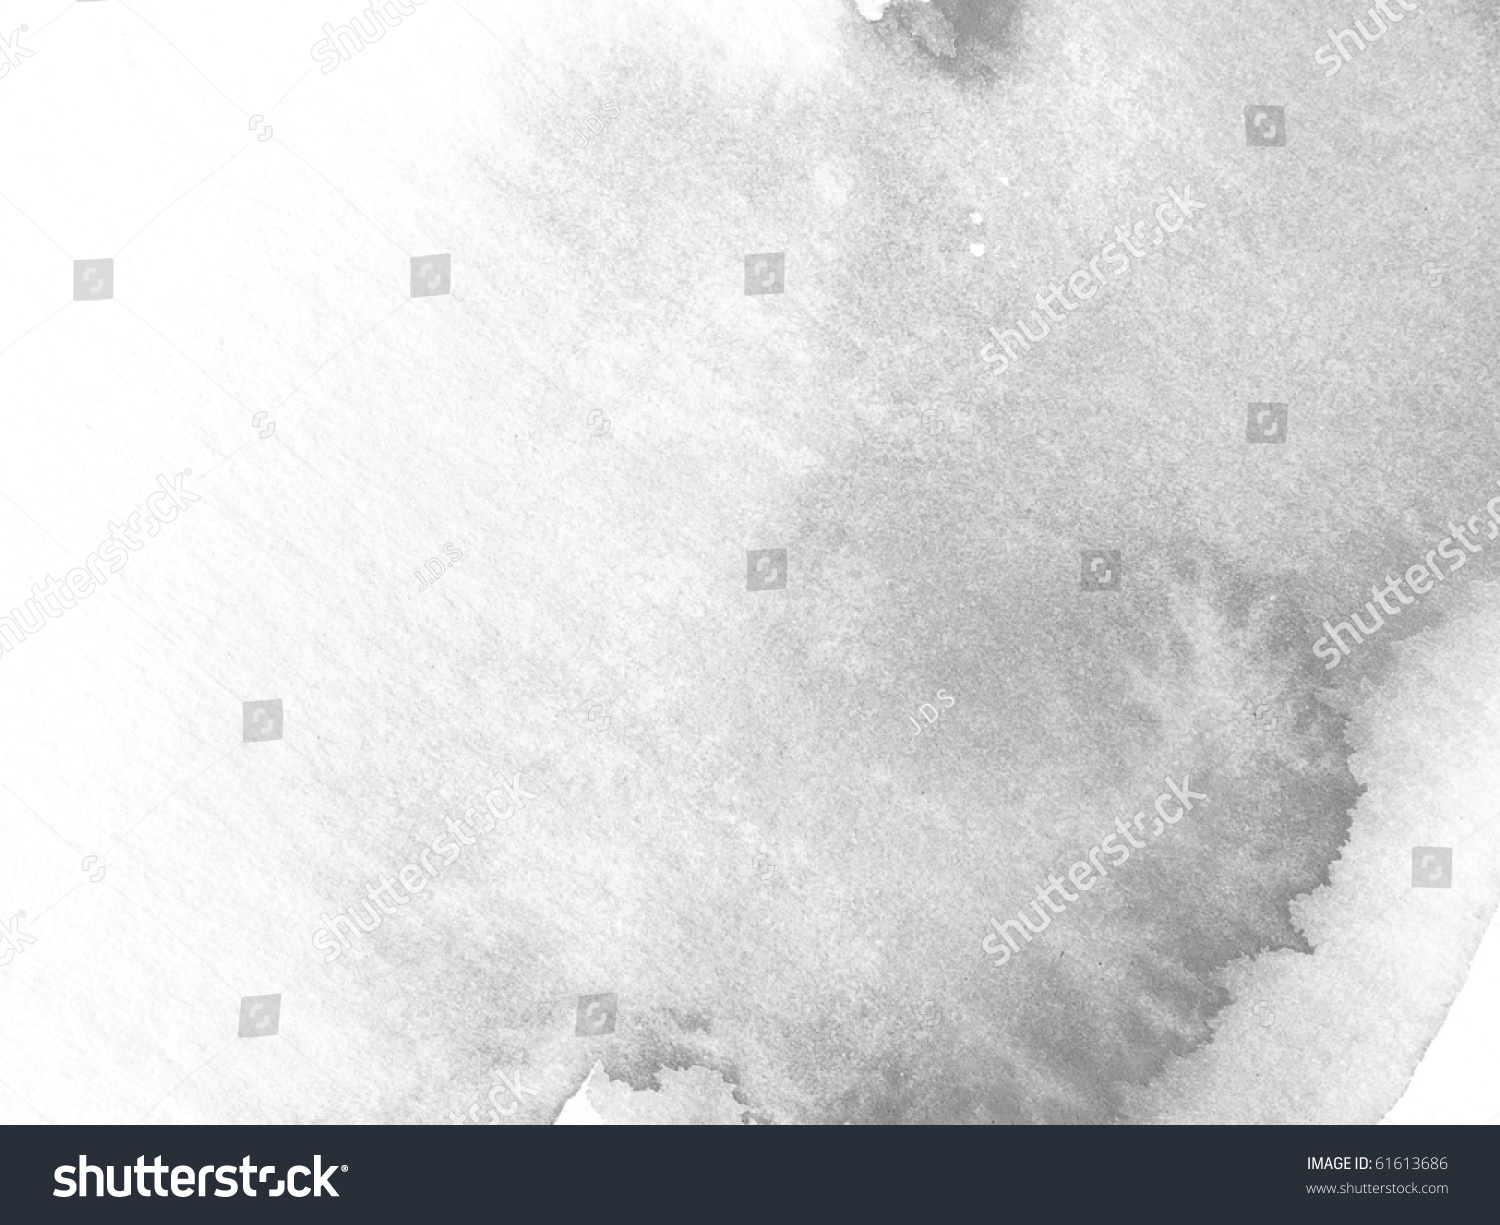 Gray Abstract Watercolor Background Design Stock Photo 61613686 ...